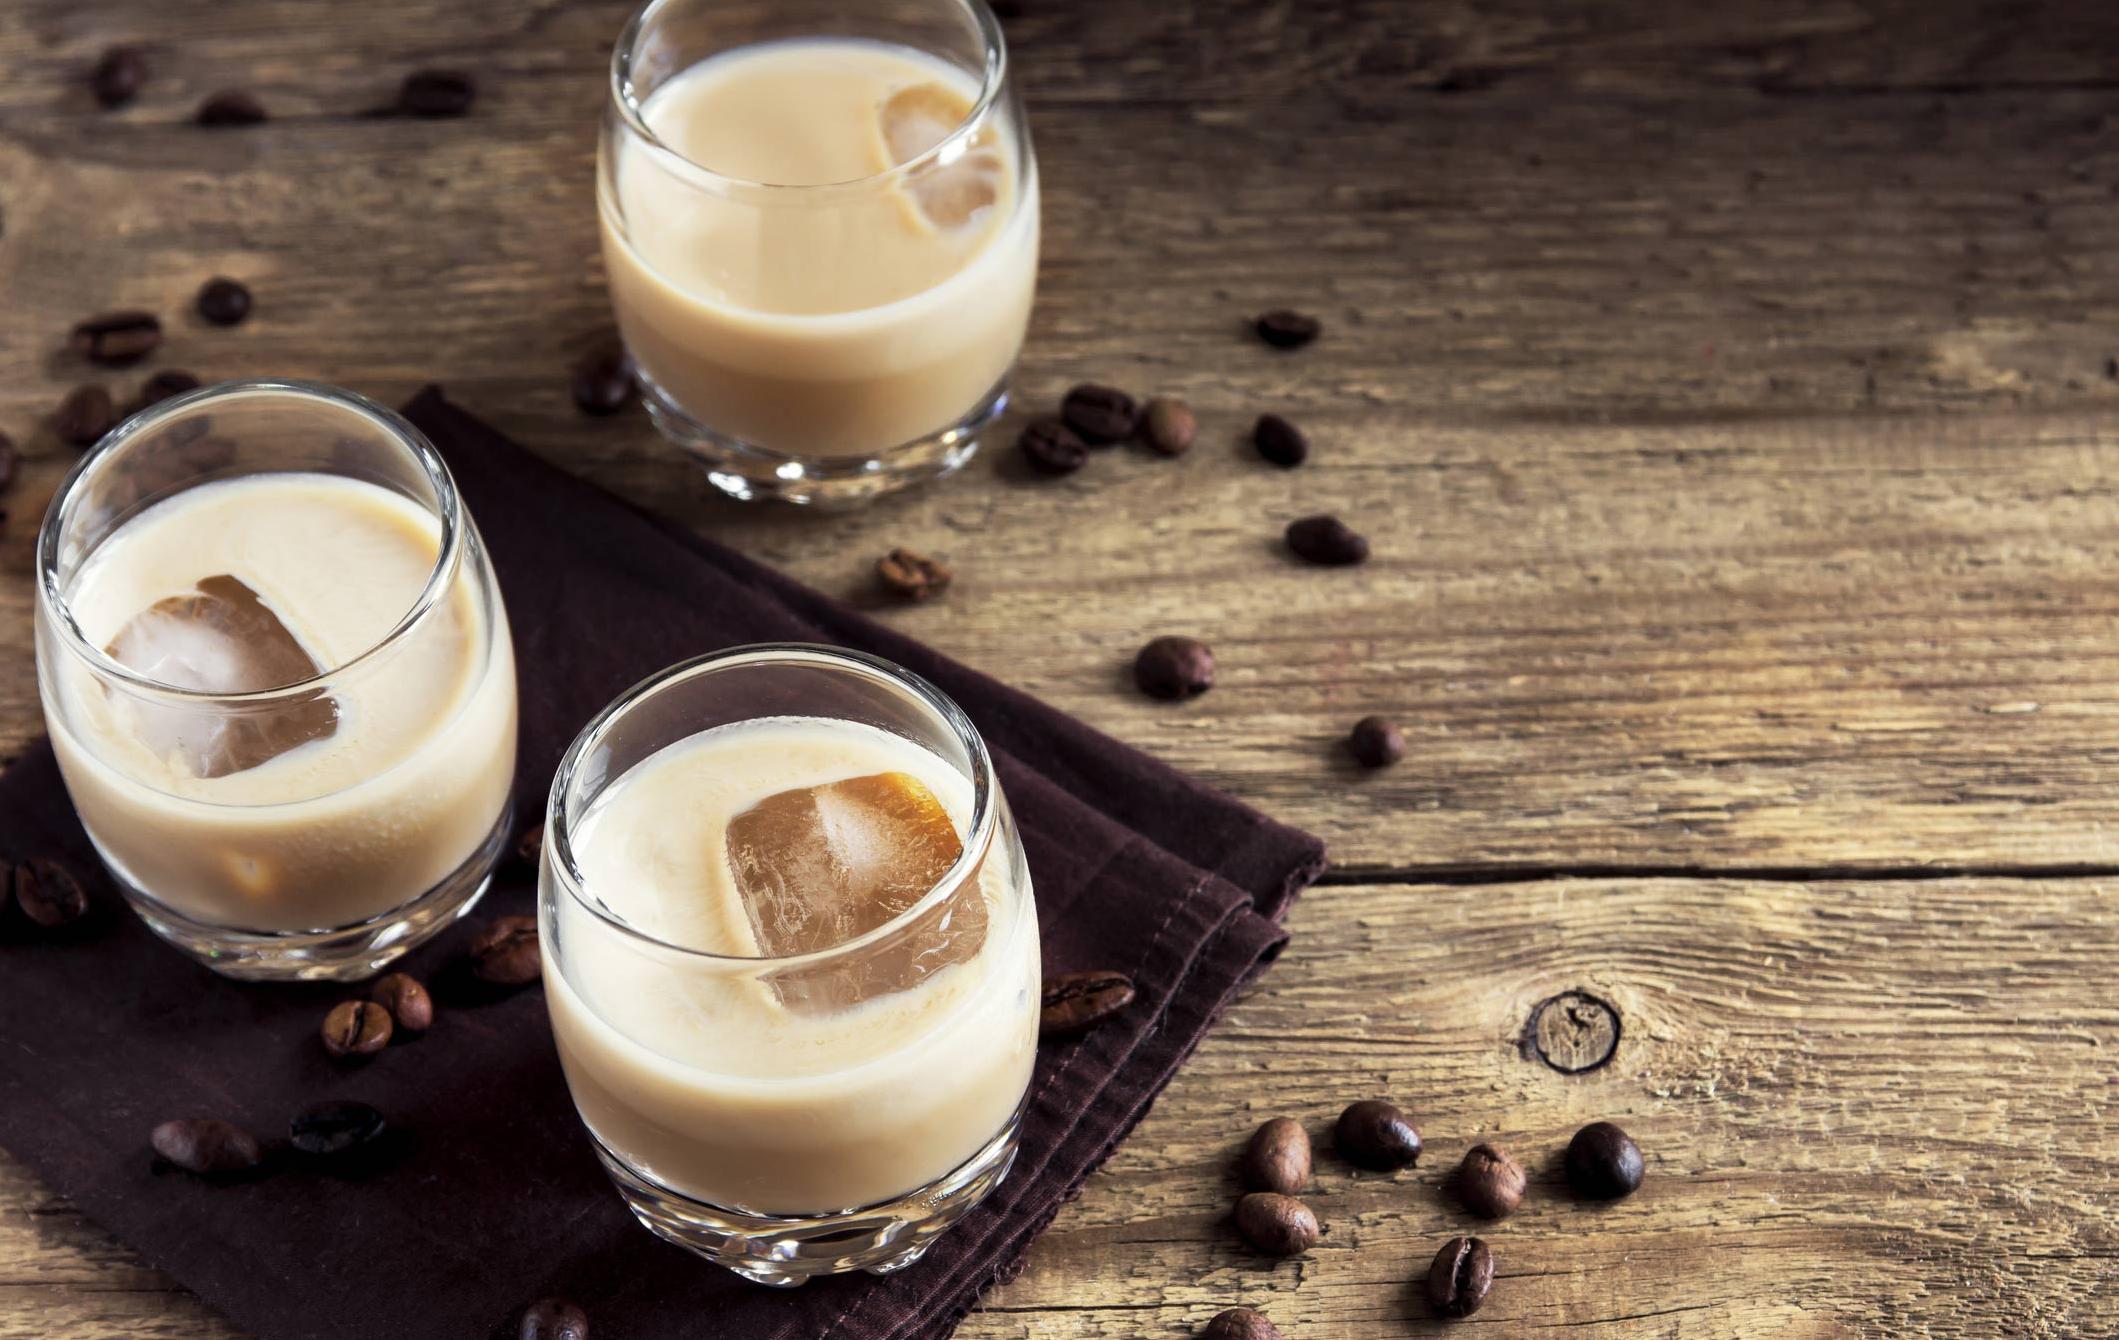  A creamy and indulgent drink that is perfect for a cozy night in